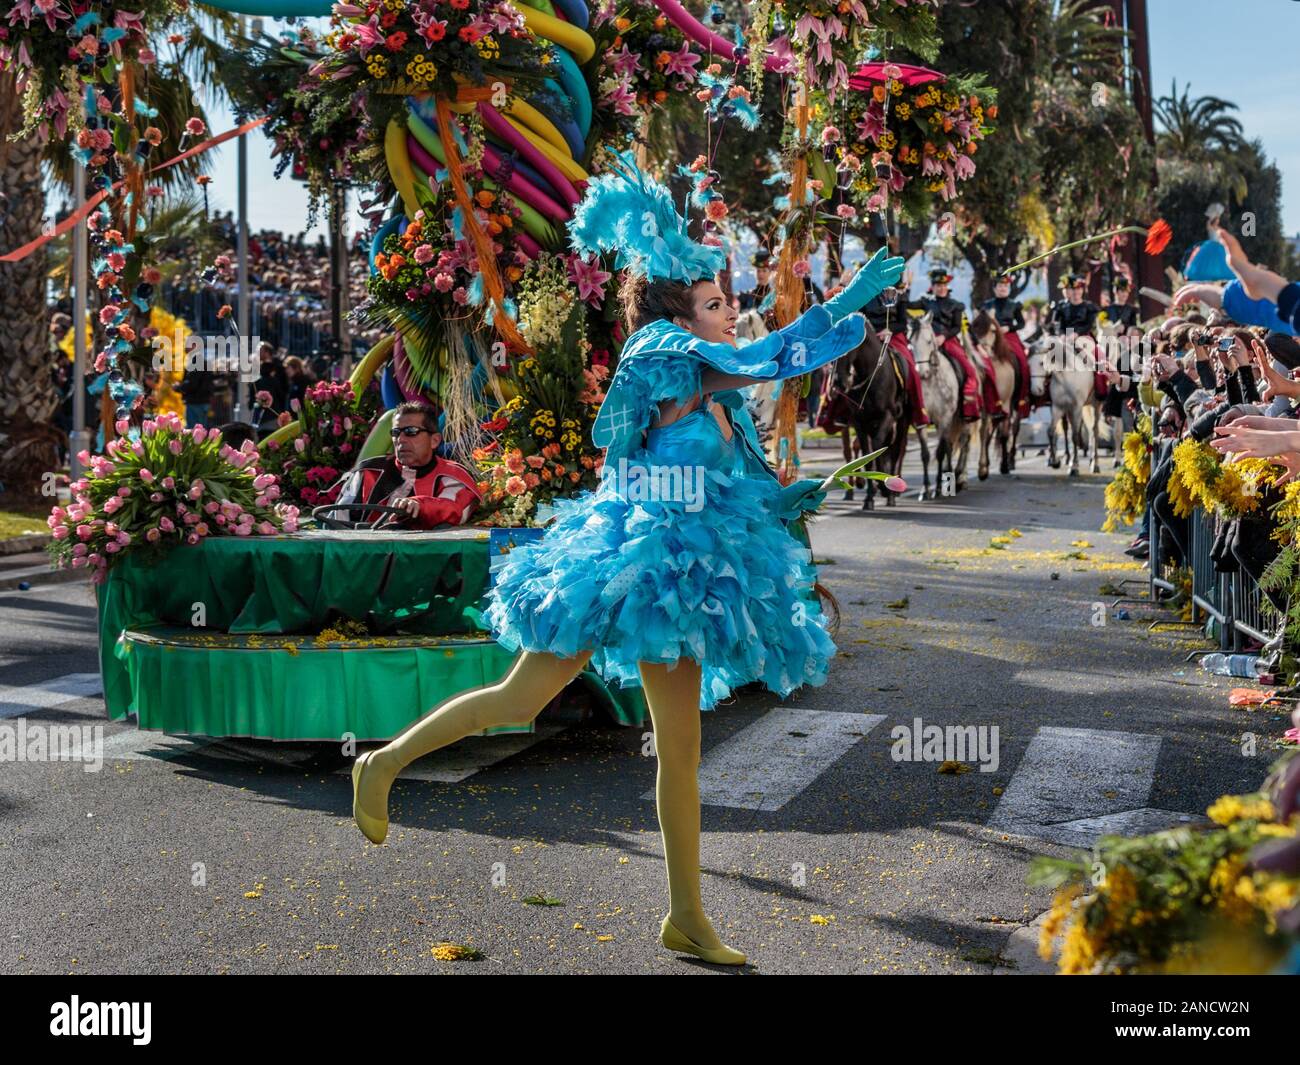 performer throwing flowers to the crowd at the Flower Parade, Nice Carnival, French Riviera, Cote d'Azur, France. Stock Photo